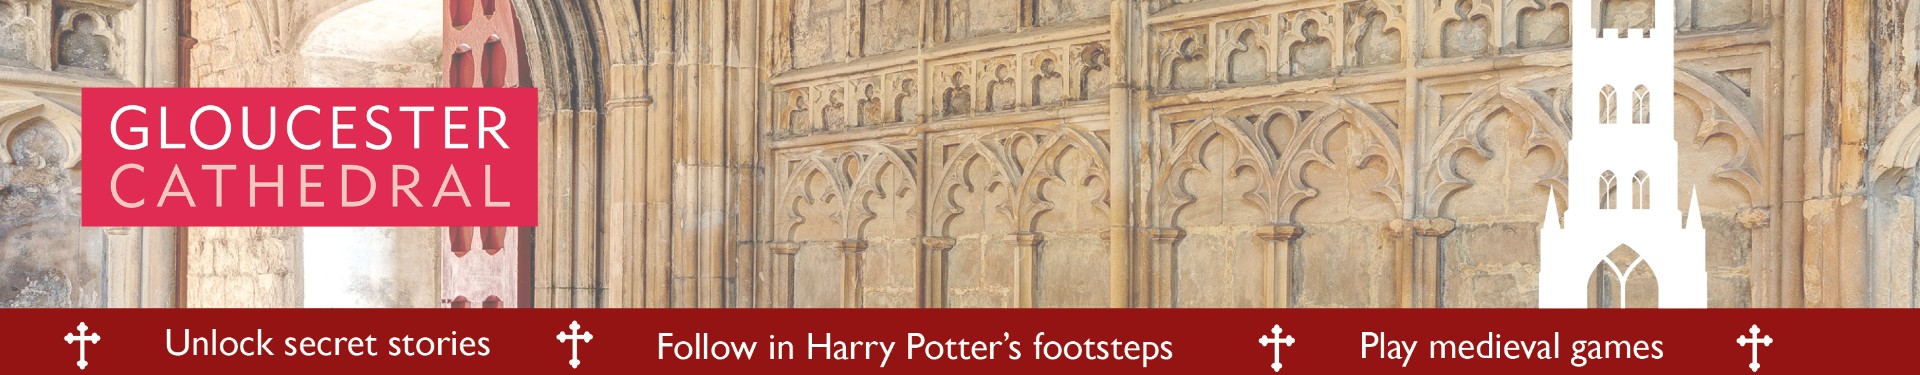 banner for Gloucester cathedral app